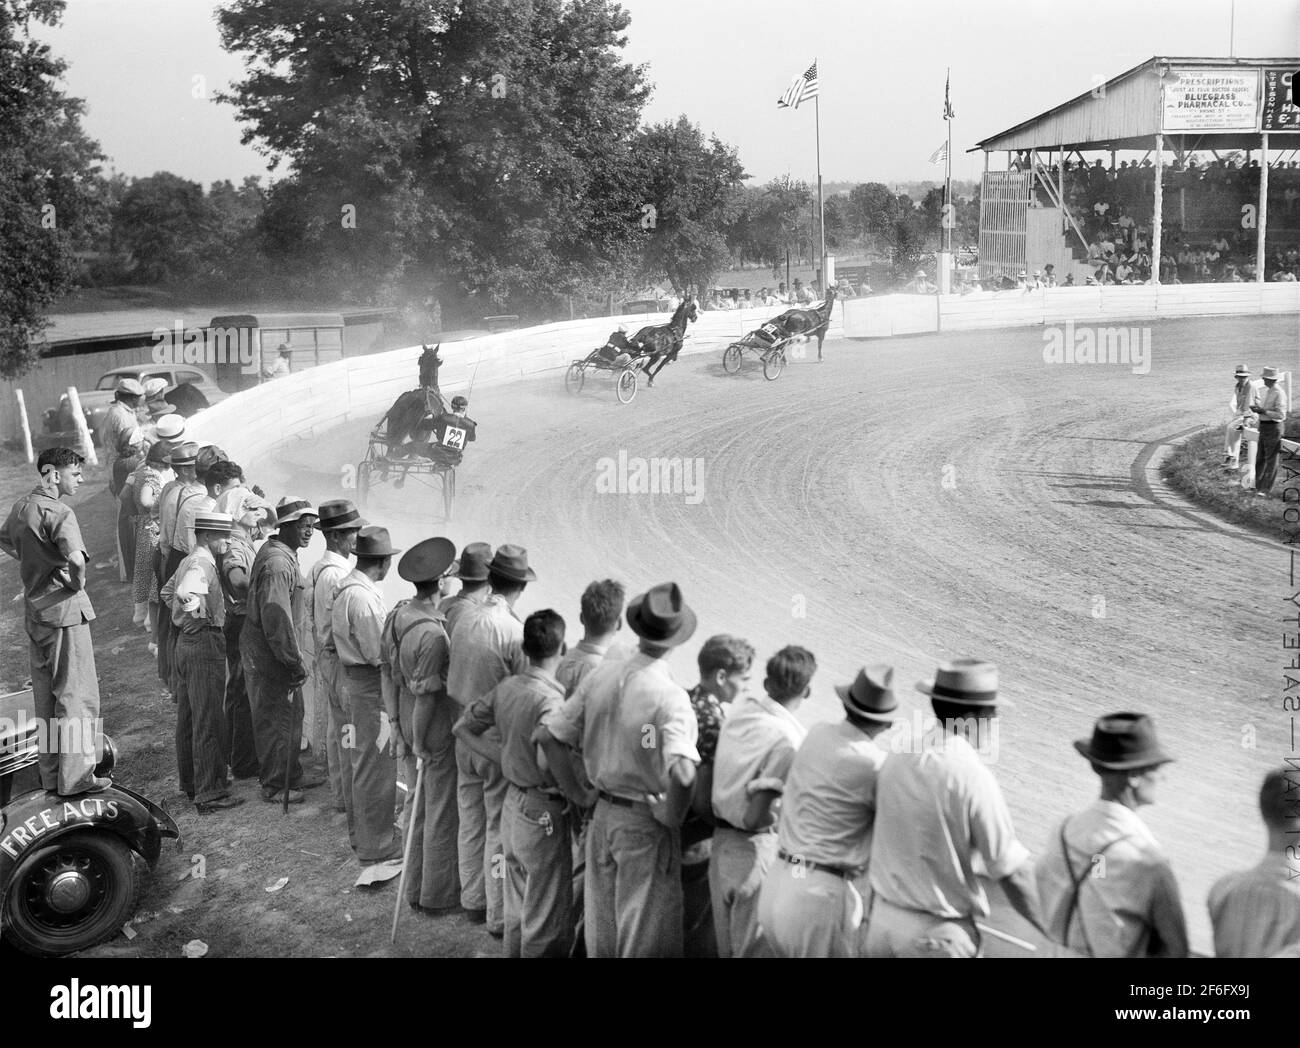 Sulky or Harness Races, Shelby County Fair, Shelbyville, Kentucky, USA, Marion Post Wolcott, U.S. Farm Security Administration, August 1940 Stock Photo